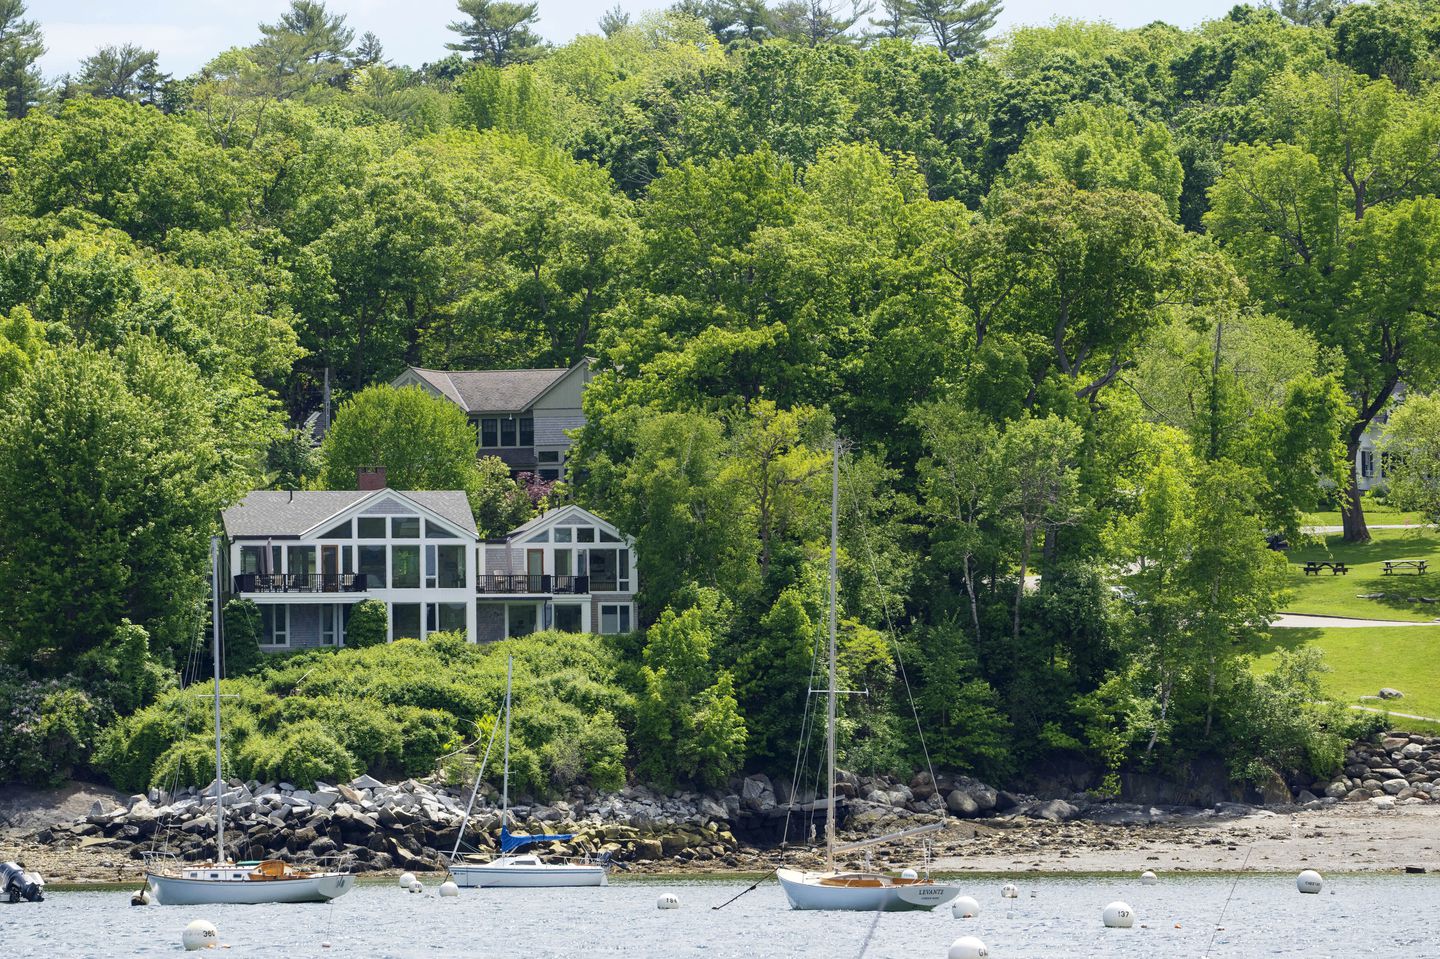 The homes of Lisa Gorman (front) and Amelia and Arthur Bond in Camden, Maine. The Bonds, a wealthy, politically connected Missouri couple, allegedly poisoned their neighbor's trees to secure a view of the harbor.